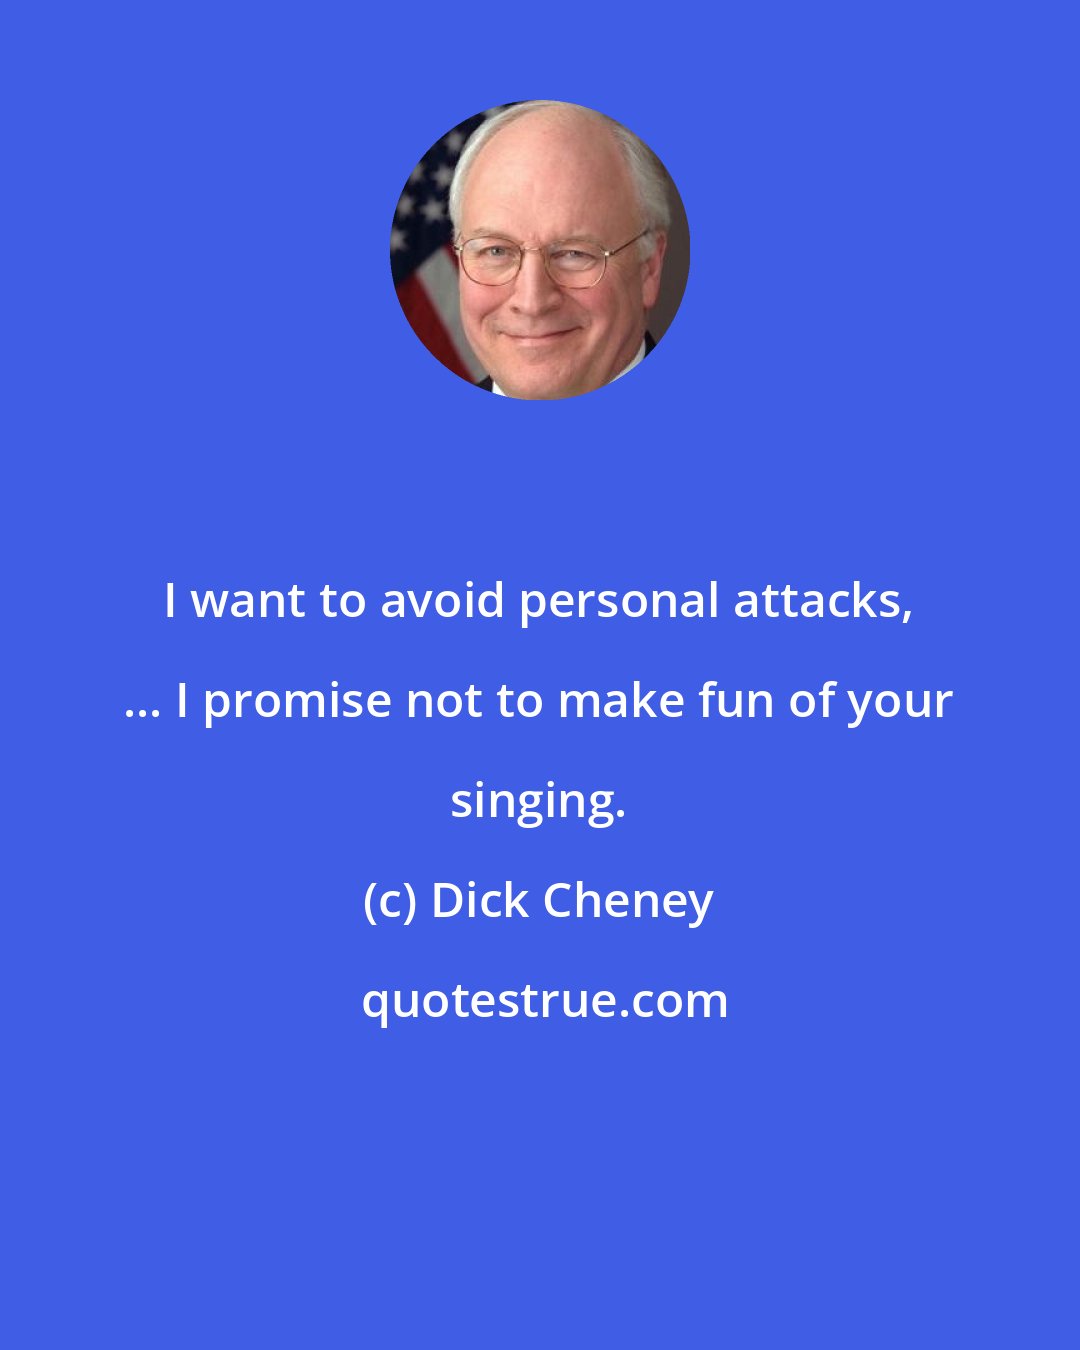 Dick Cheney: I want to avoid personal attacks, ... I promise not to make fun of your singing.